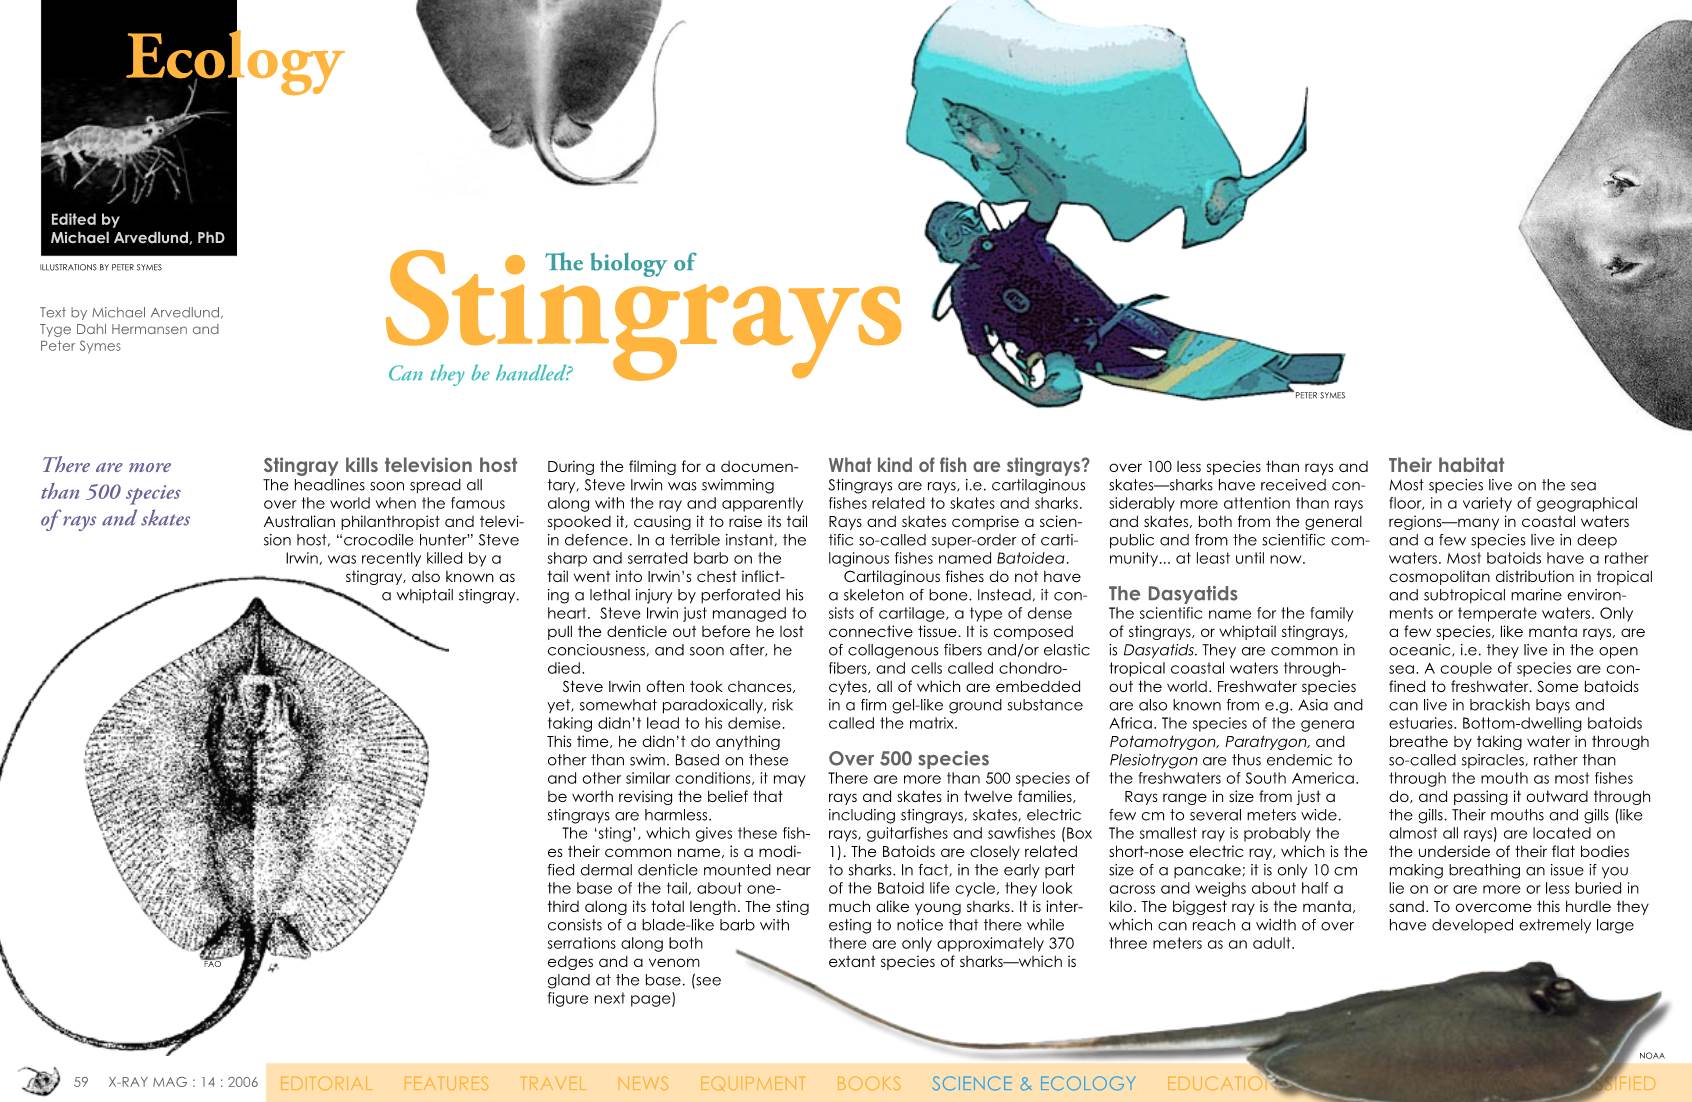 Stingrays Can They Be Handled? PETER SYMES